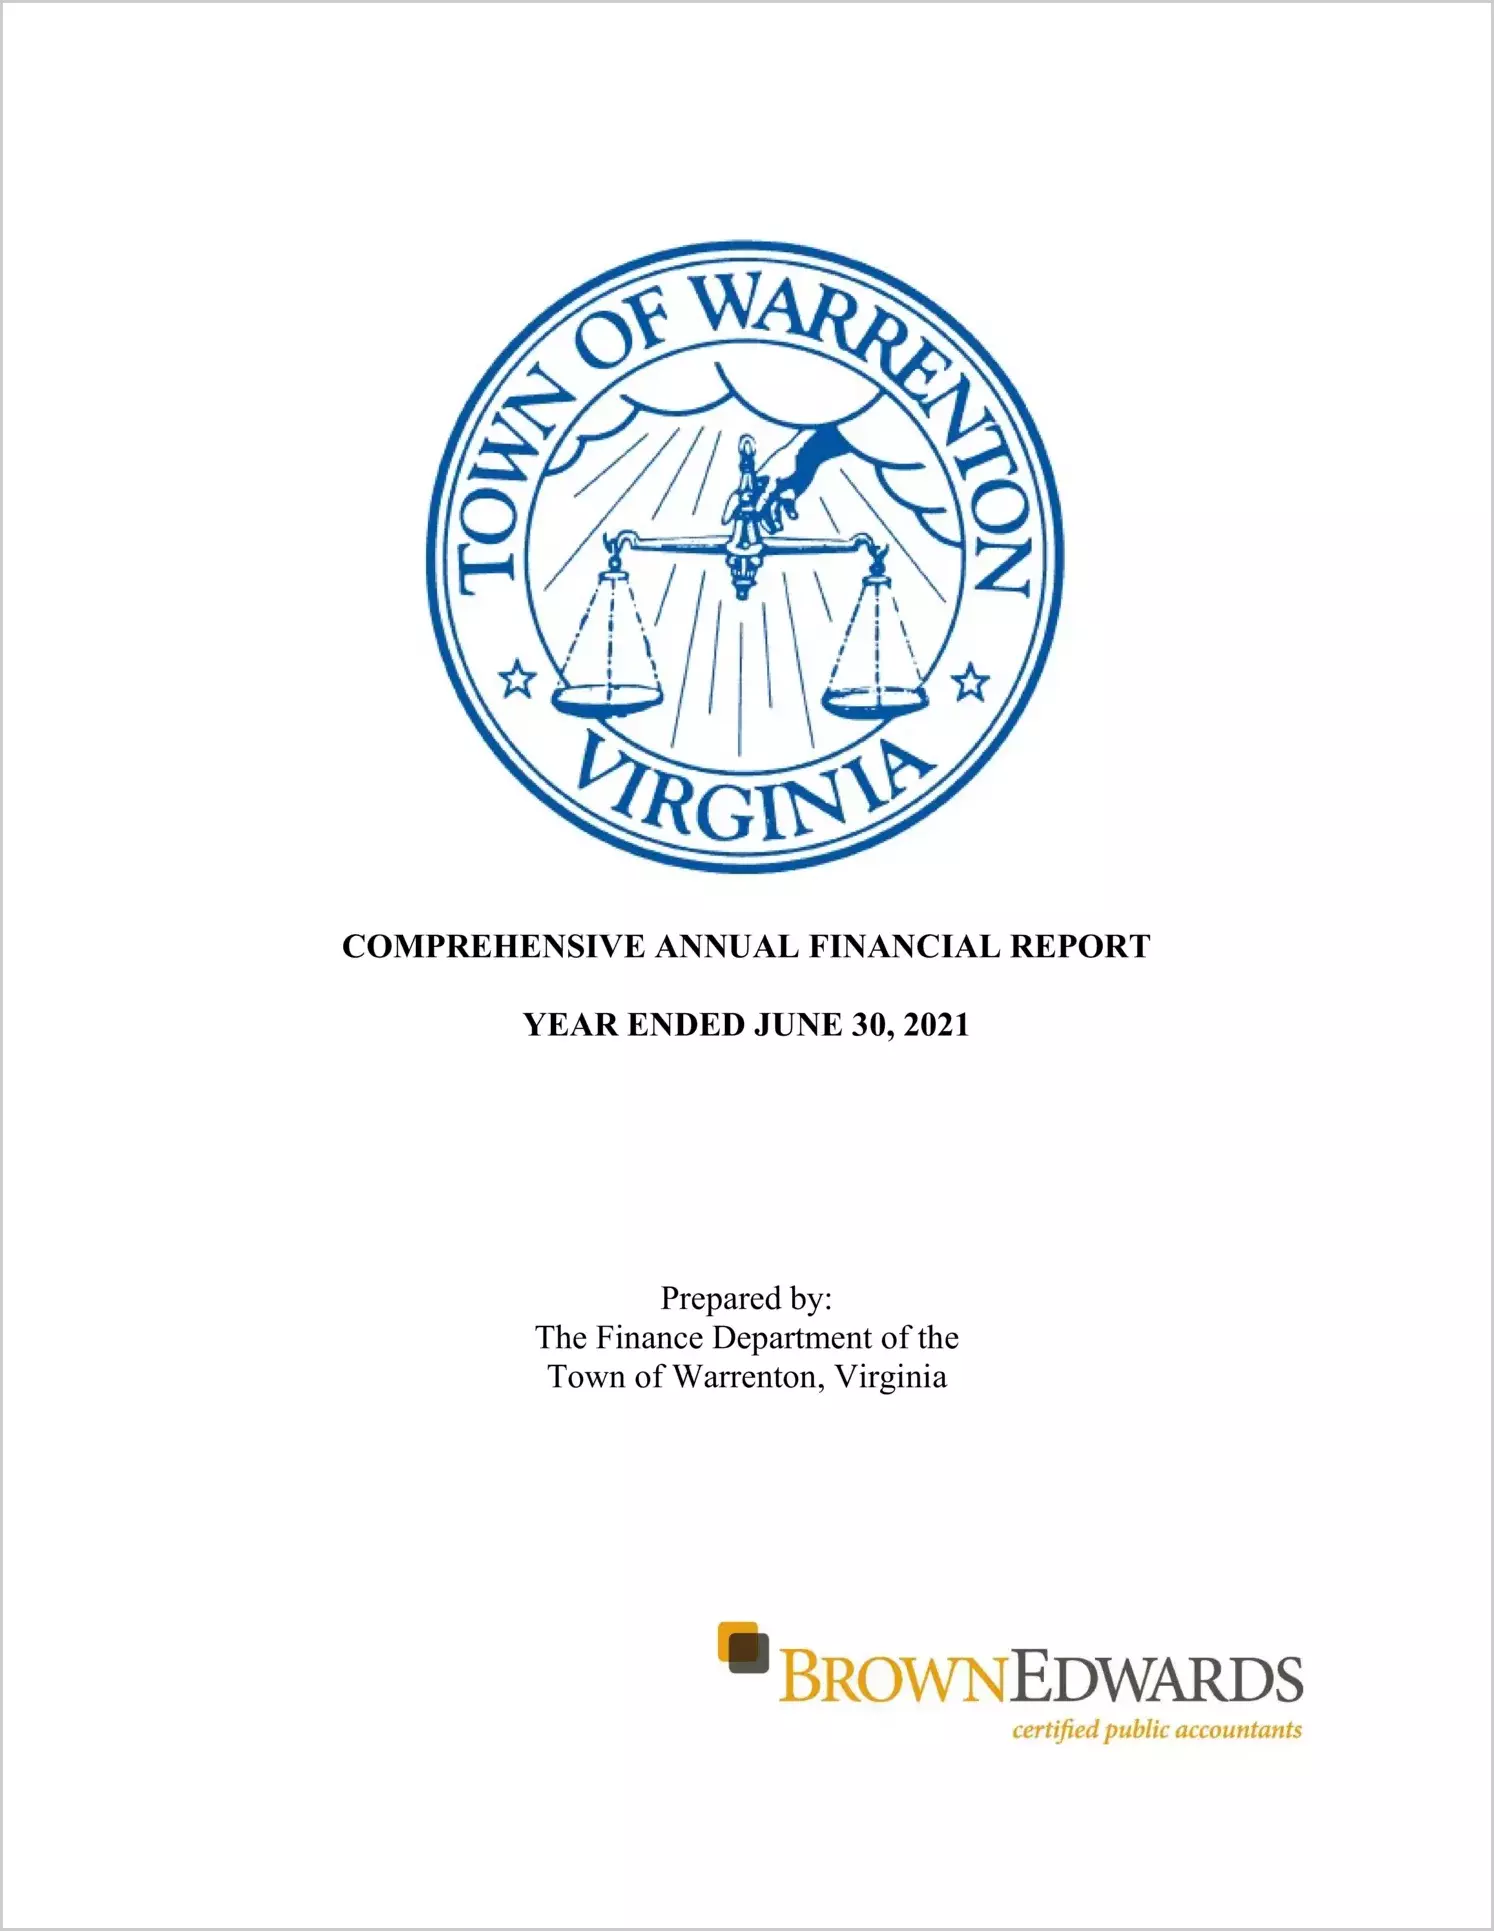 2021 Annual Financial Report for Town of Warrenton